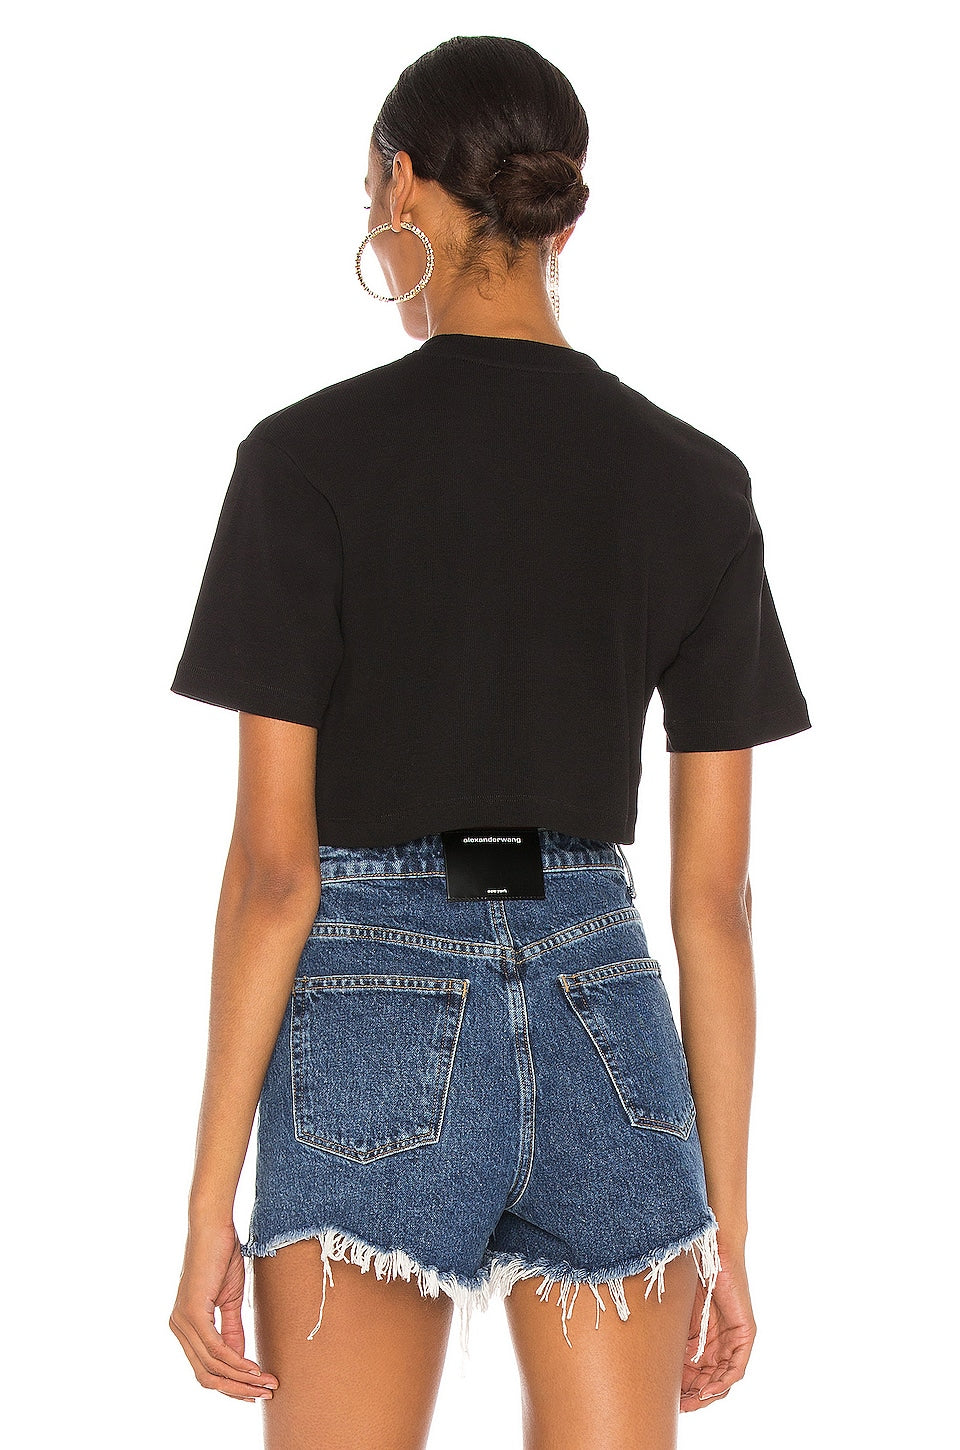 OFF-WHITE Rib Cropped Casual Tee in Black & White Size Small